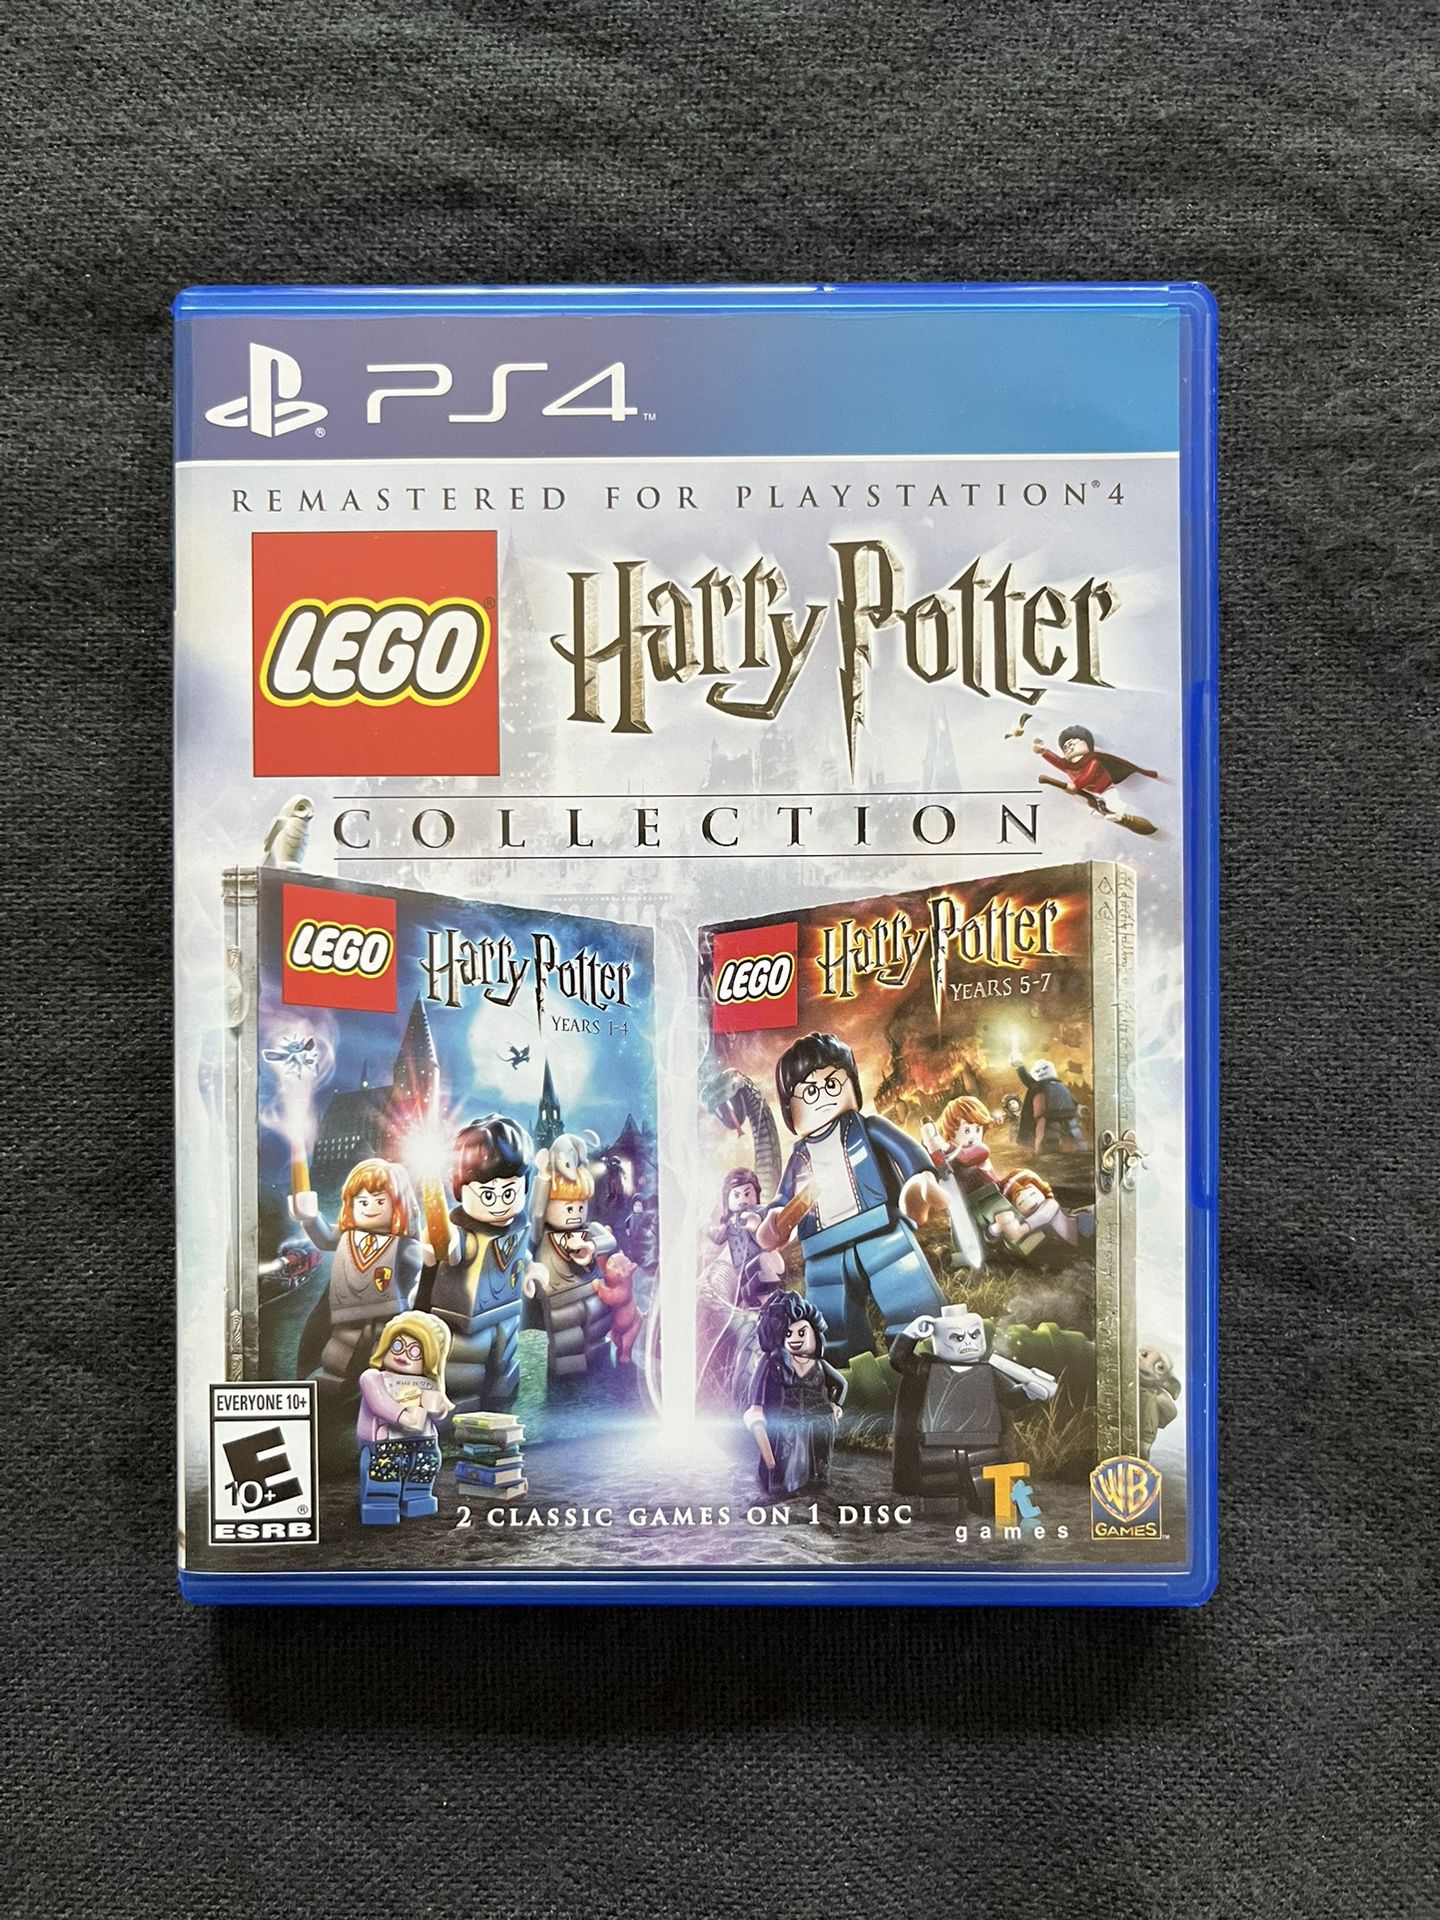 Lego Harry Potter for PS4